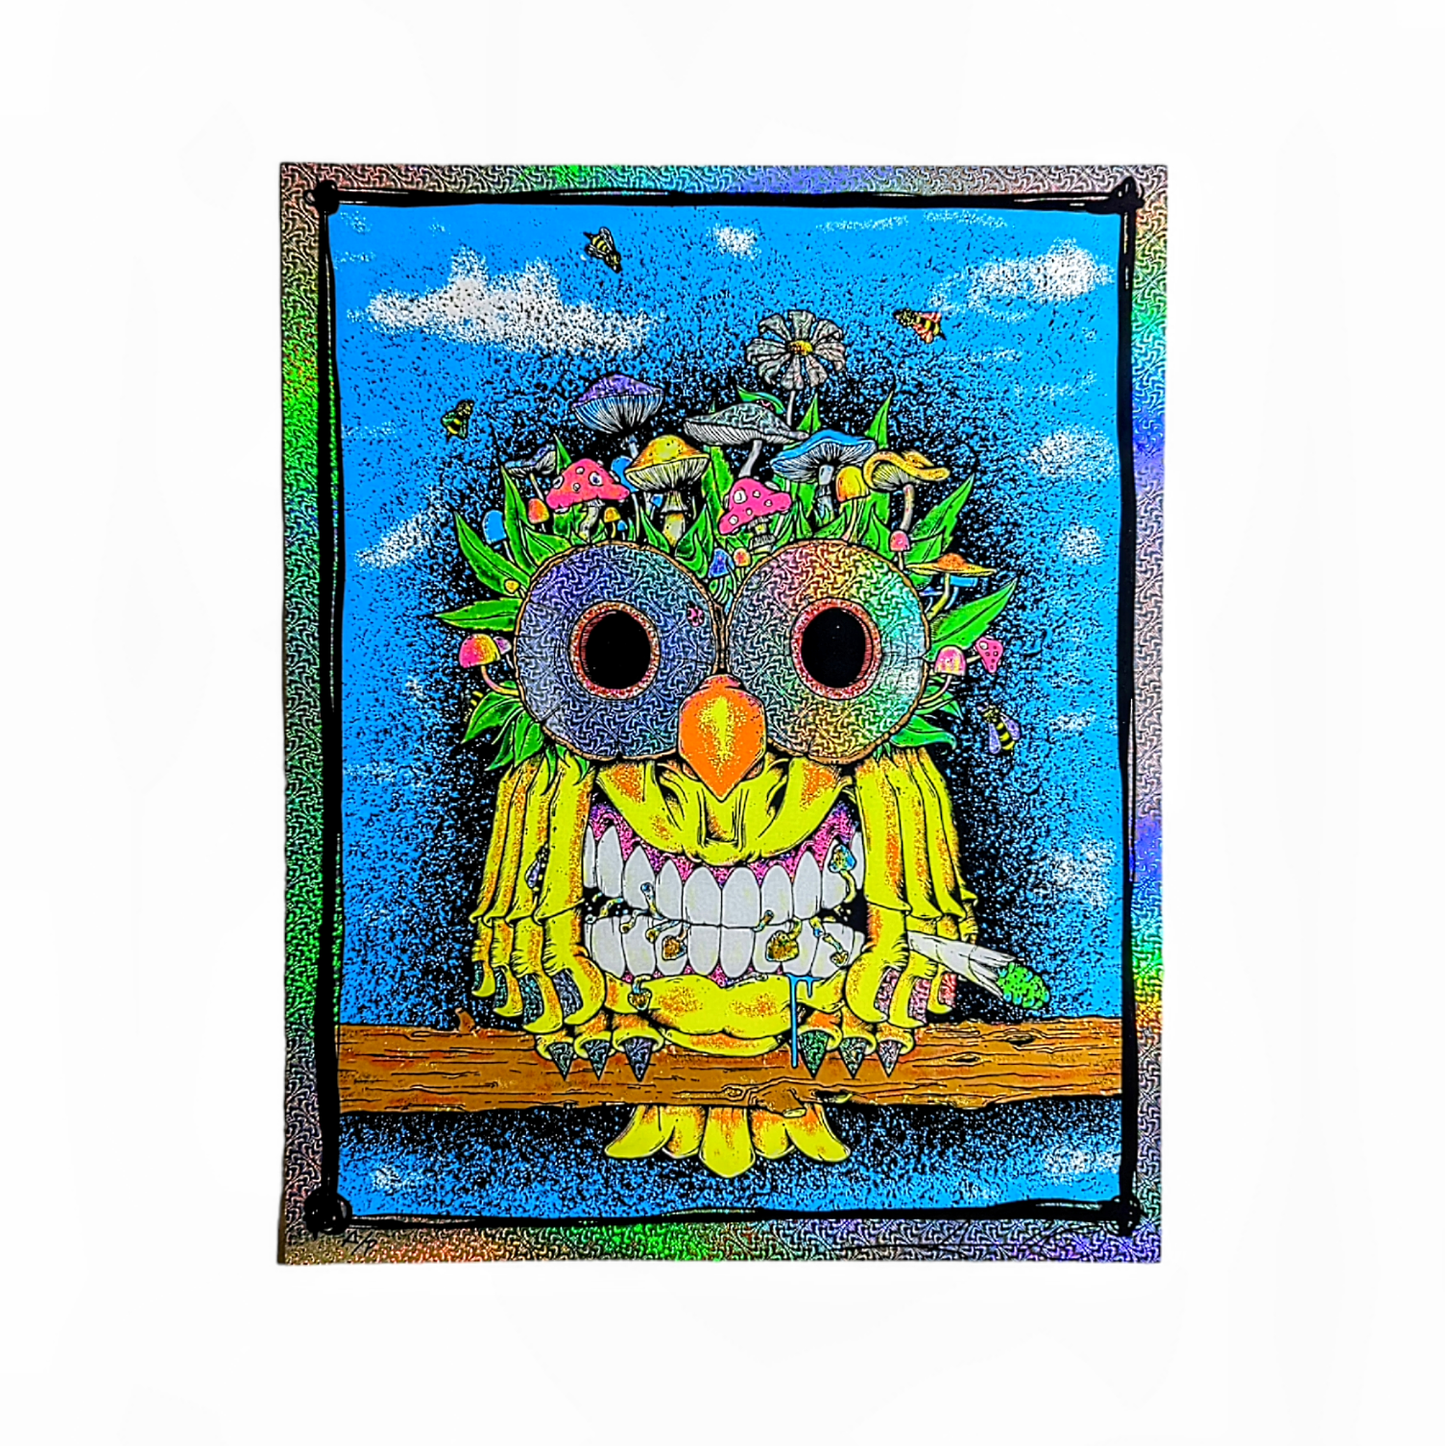 Aaron Brooks  Earth Owl (Foil) Archival Pigment Print on Foil 16 x 20 in AP  Hand Signed + Numbered by the artist. Printed in Colorado by CIK STUDIOS.